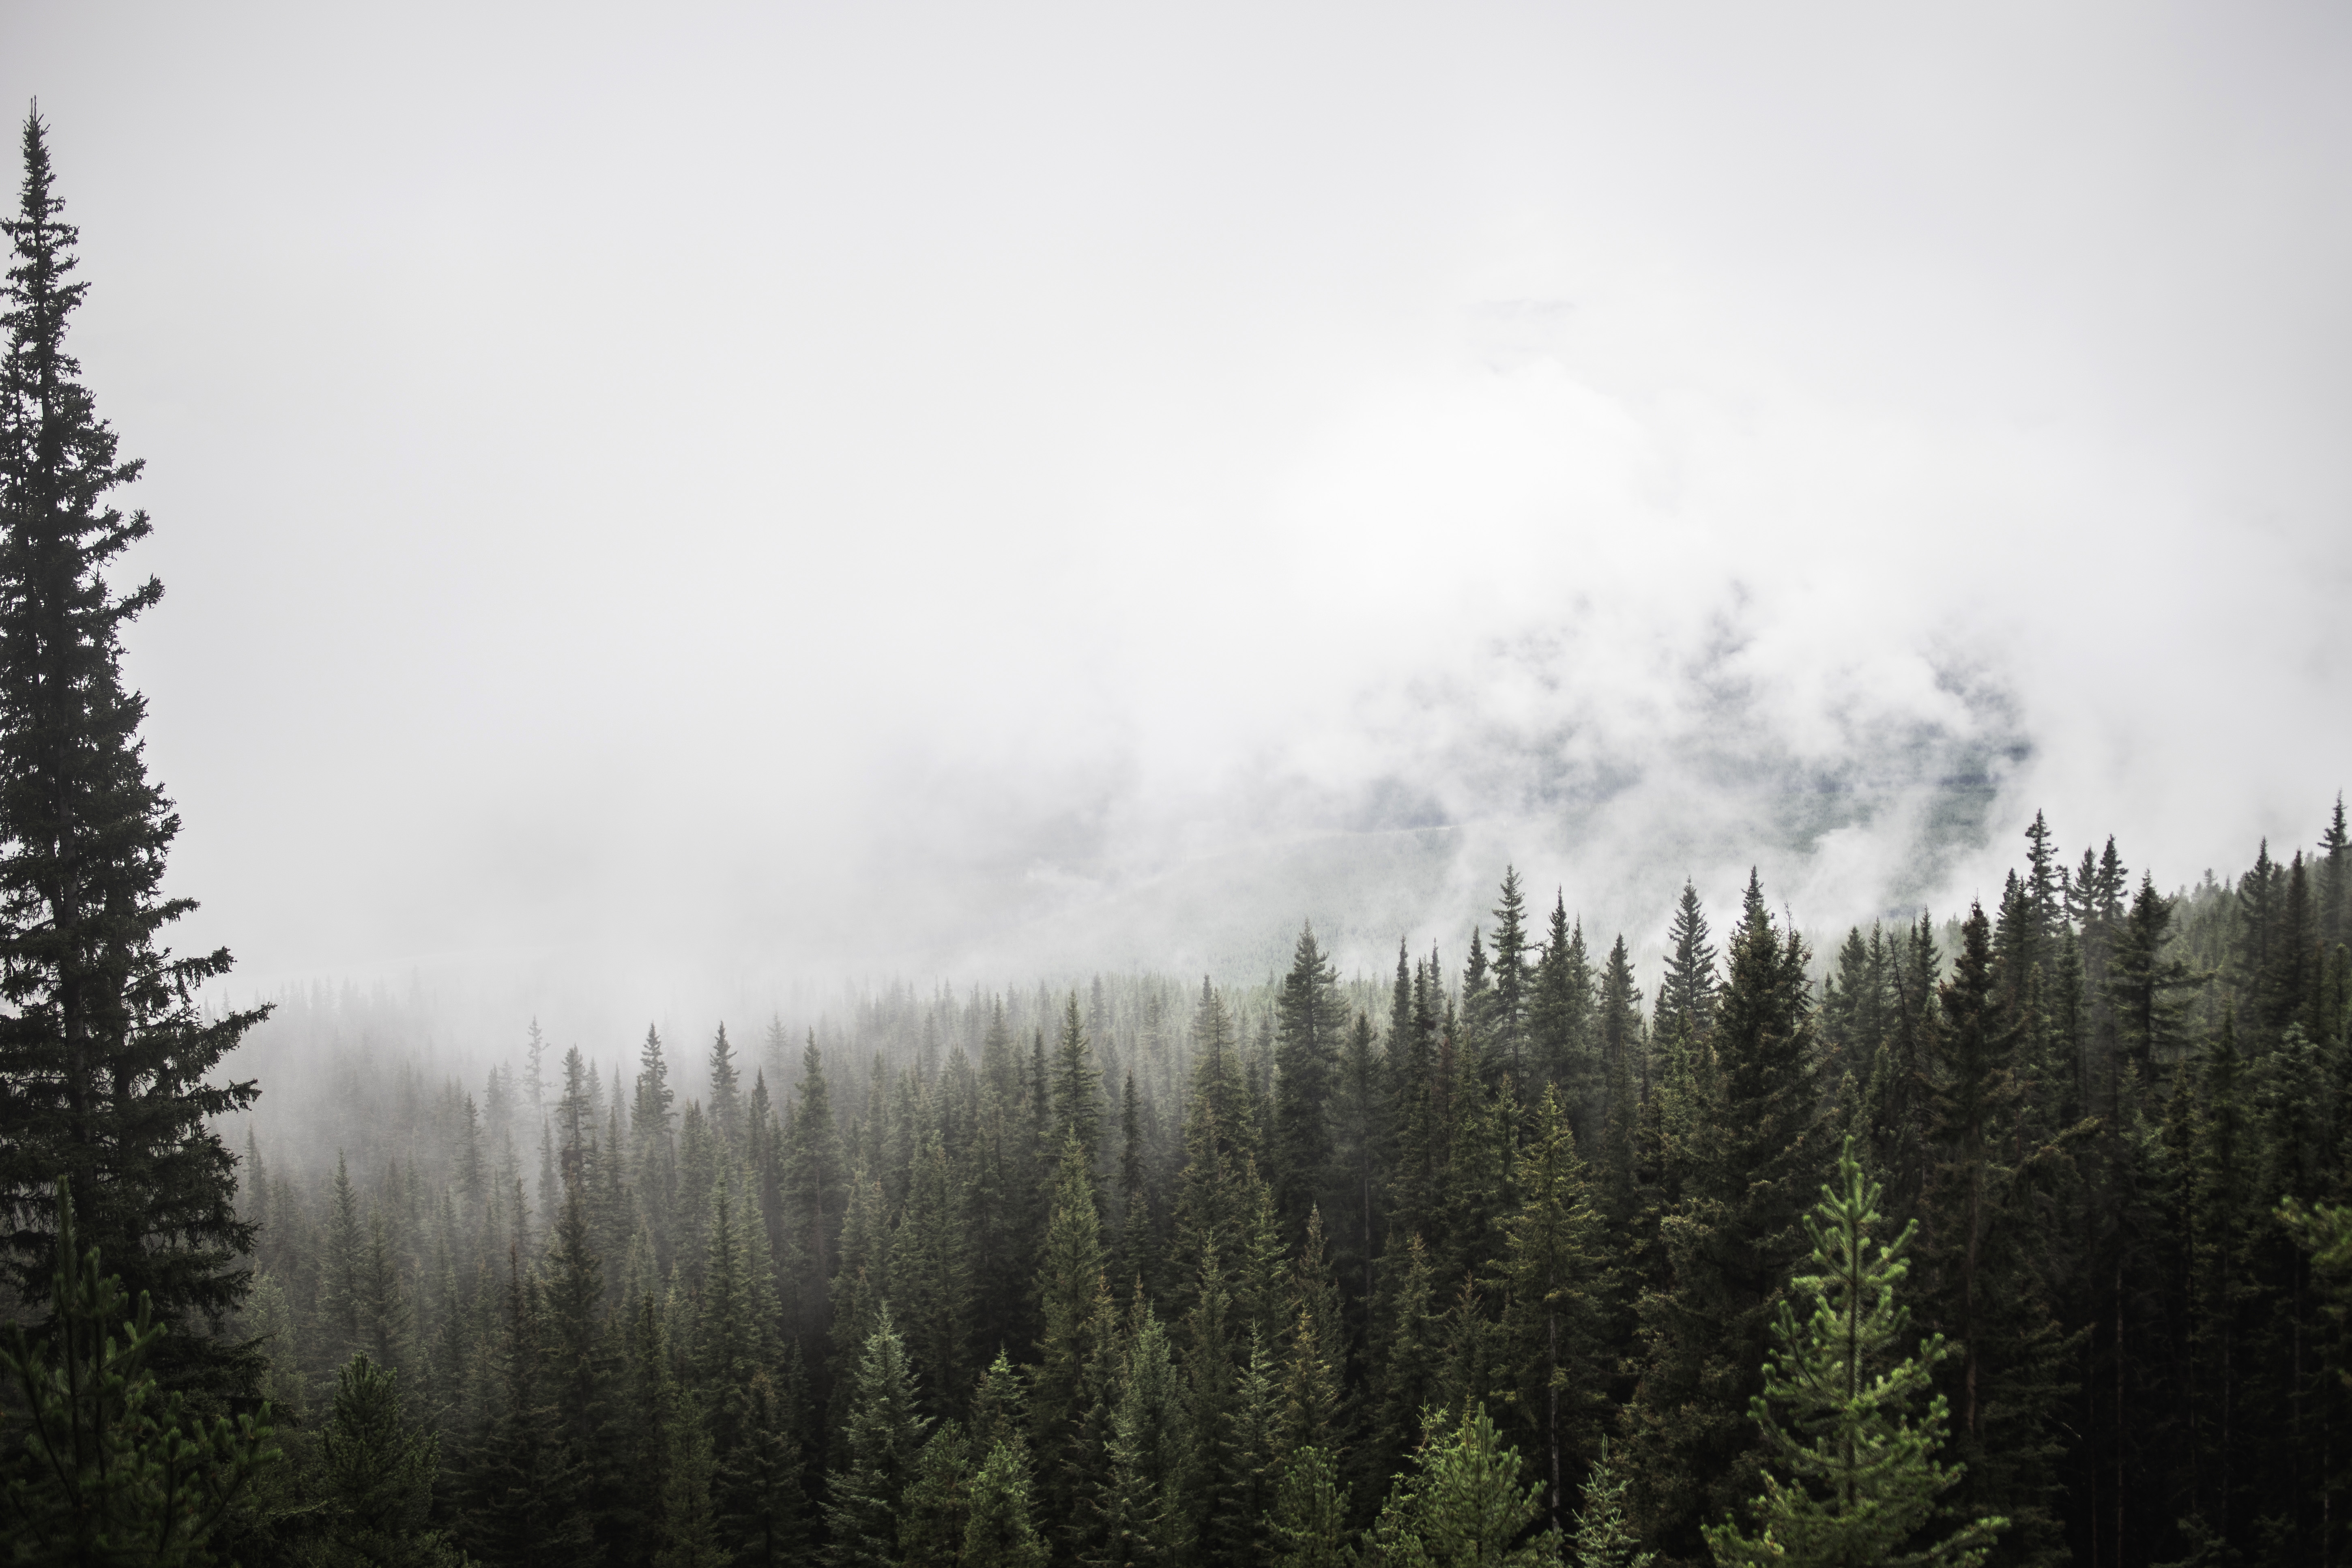 Pine Forest with trees and fog in Banff National Park image - Free ...